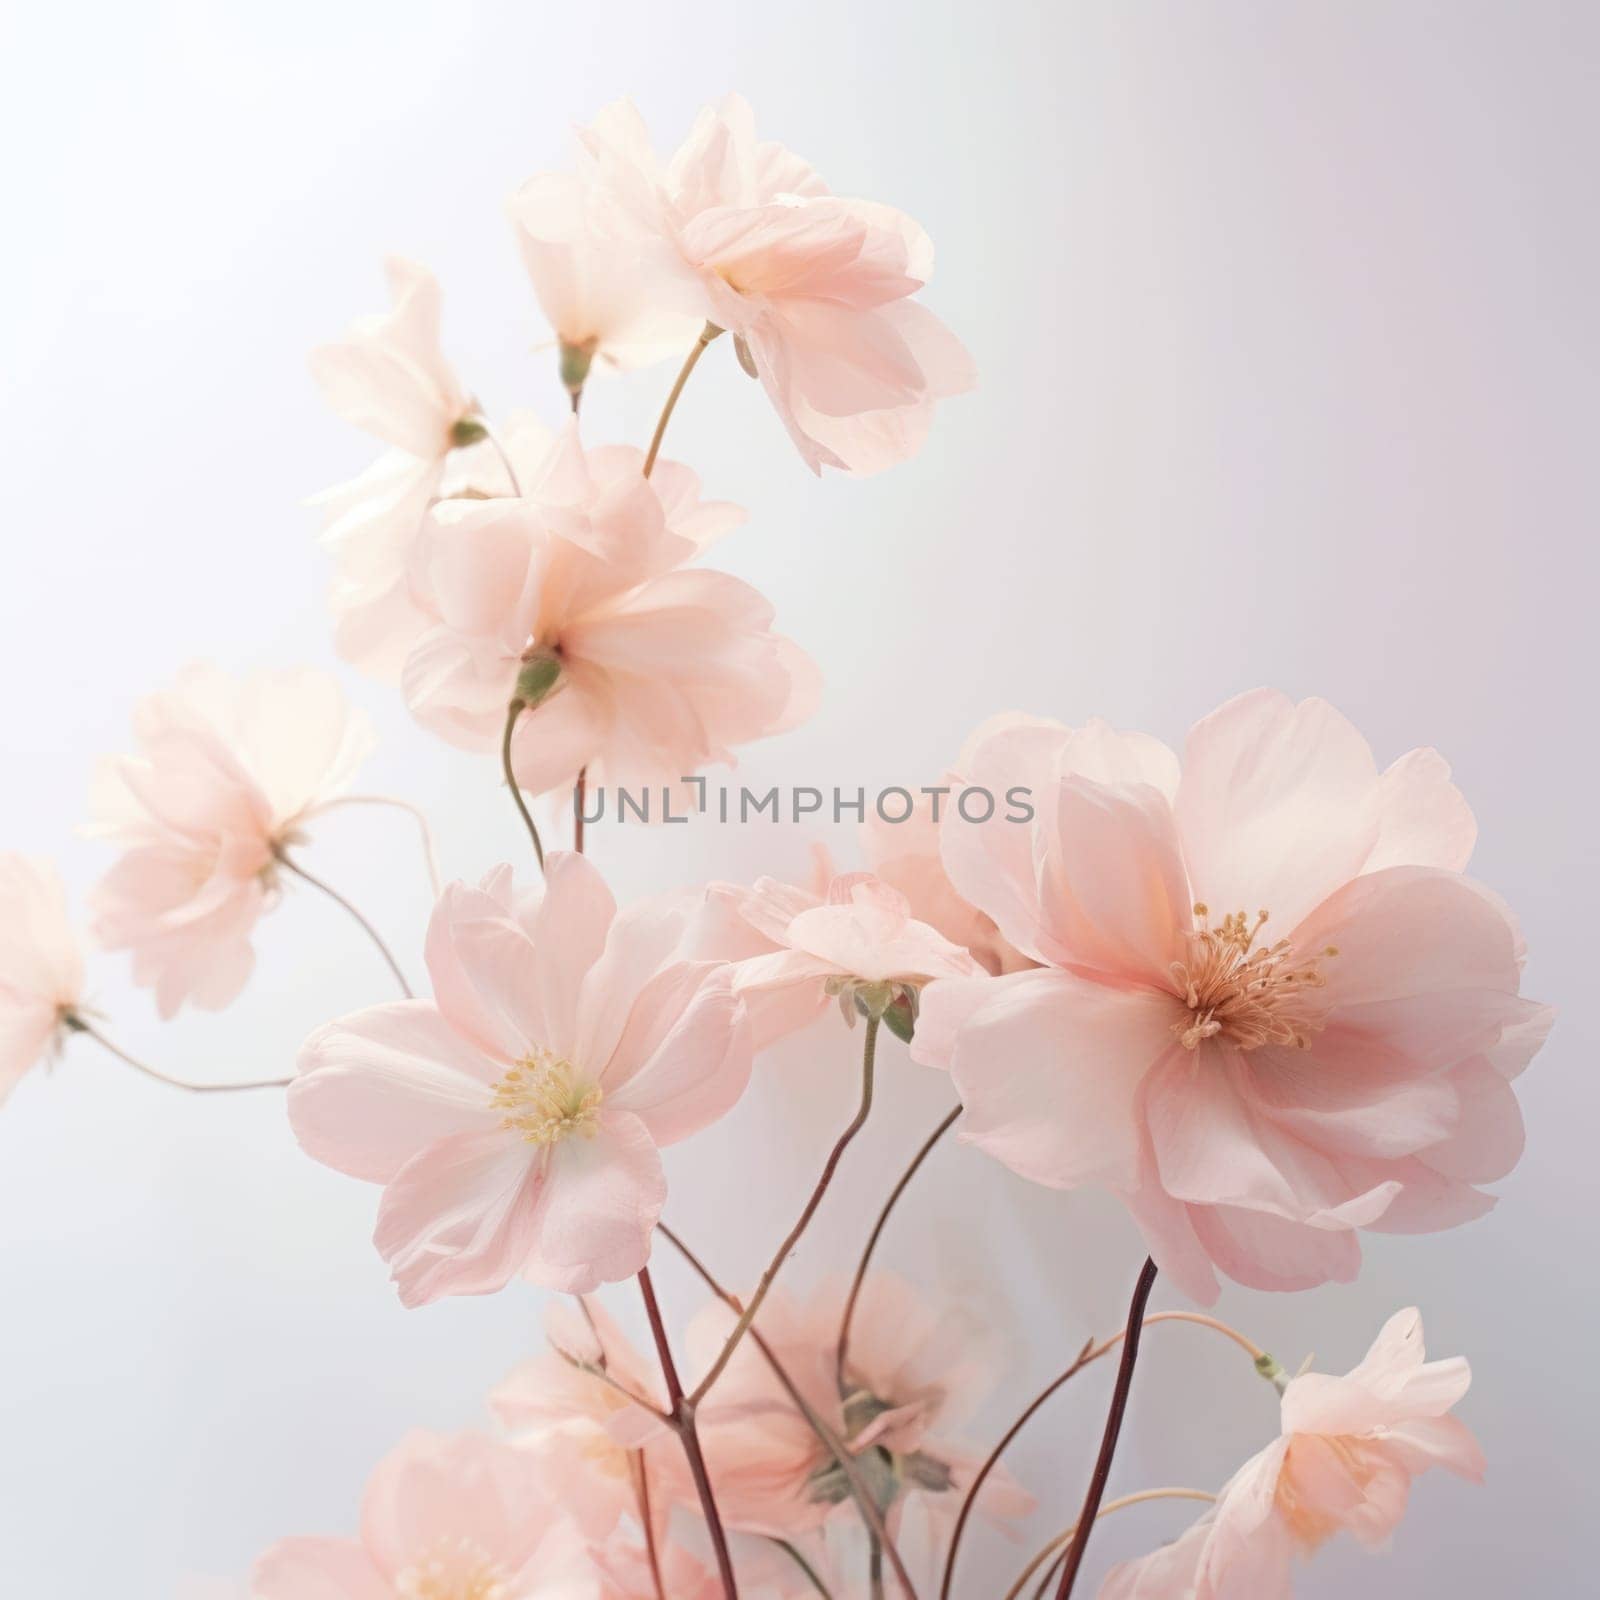 A vase of pink flowers on a white background, AI by starush